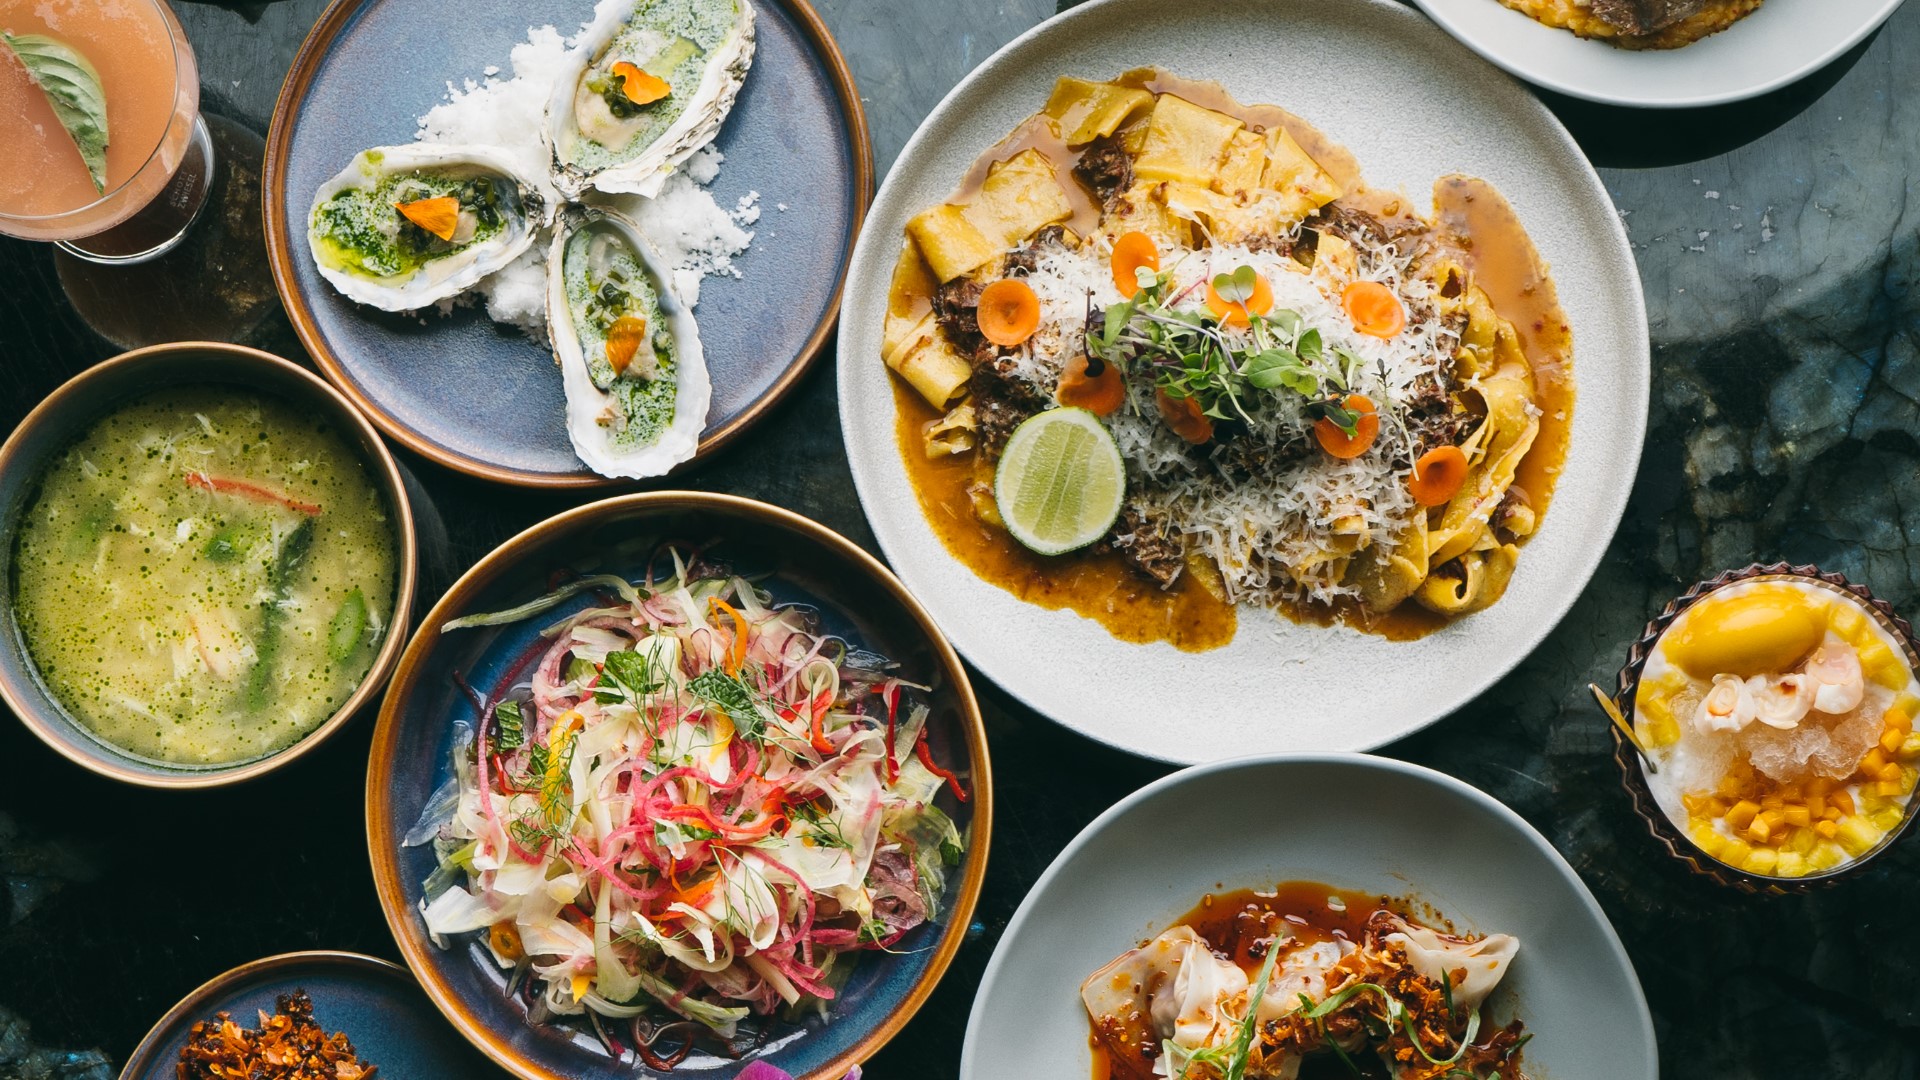 Tuyet Nhi Le and Daniel Le of Nue Elegantly Vietnamese, share what we can expect from the new restaurant in Falls Church, Virginia.